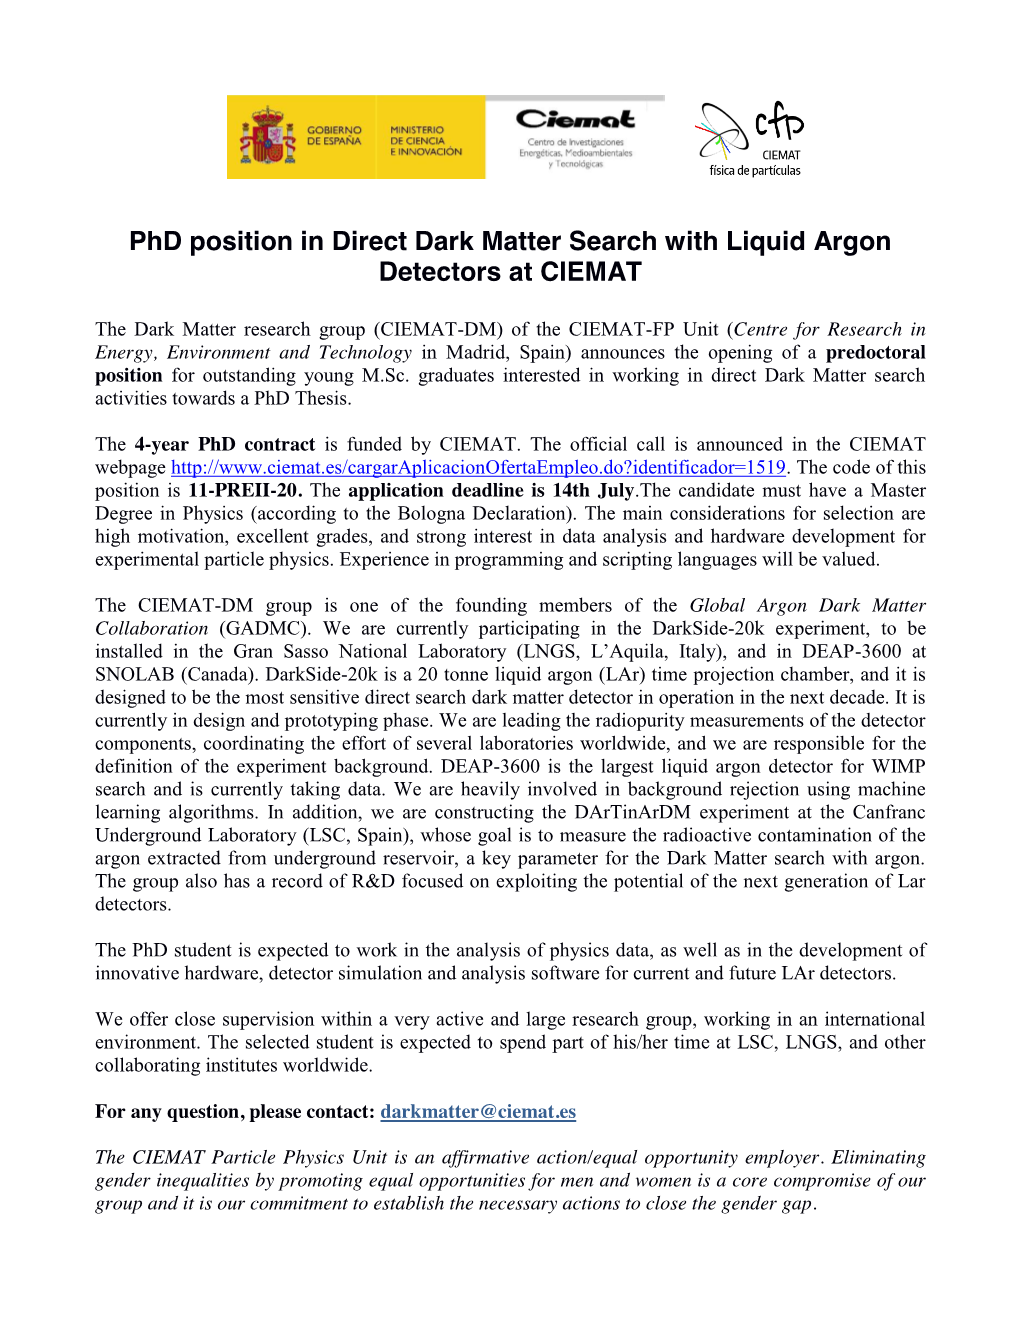 Phd Position in Direct Dark Matter Search with Liquid Argon Detectors at CIEMAT